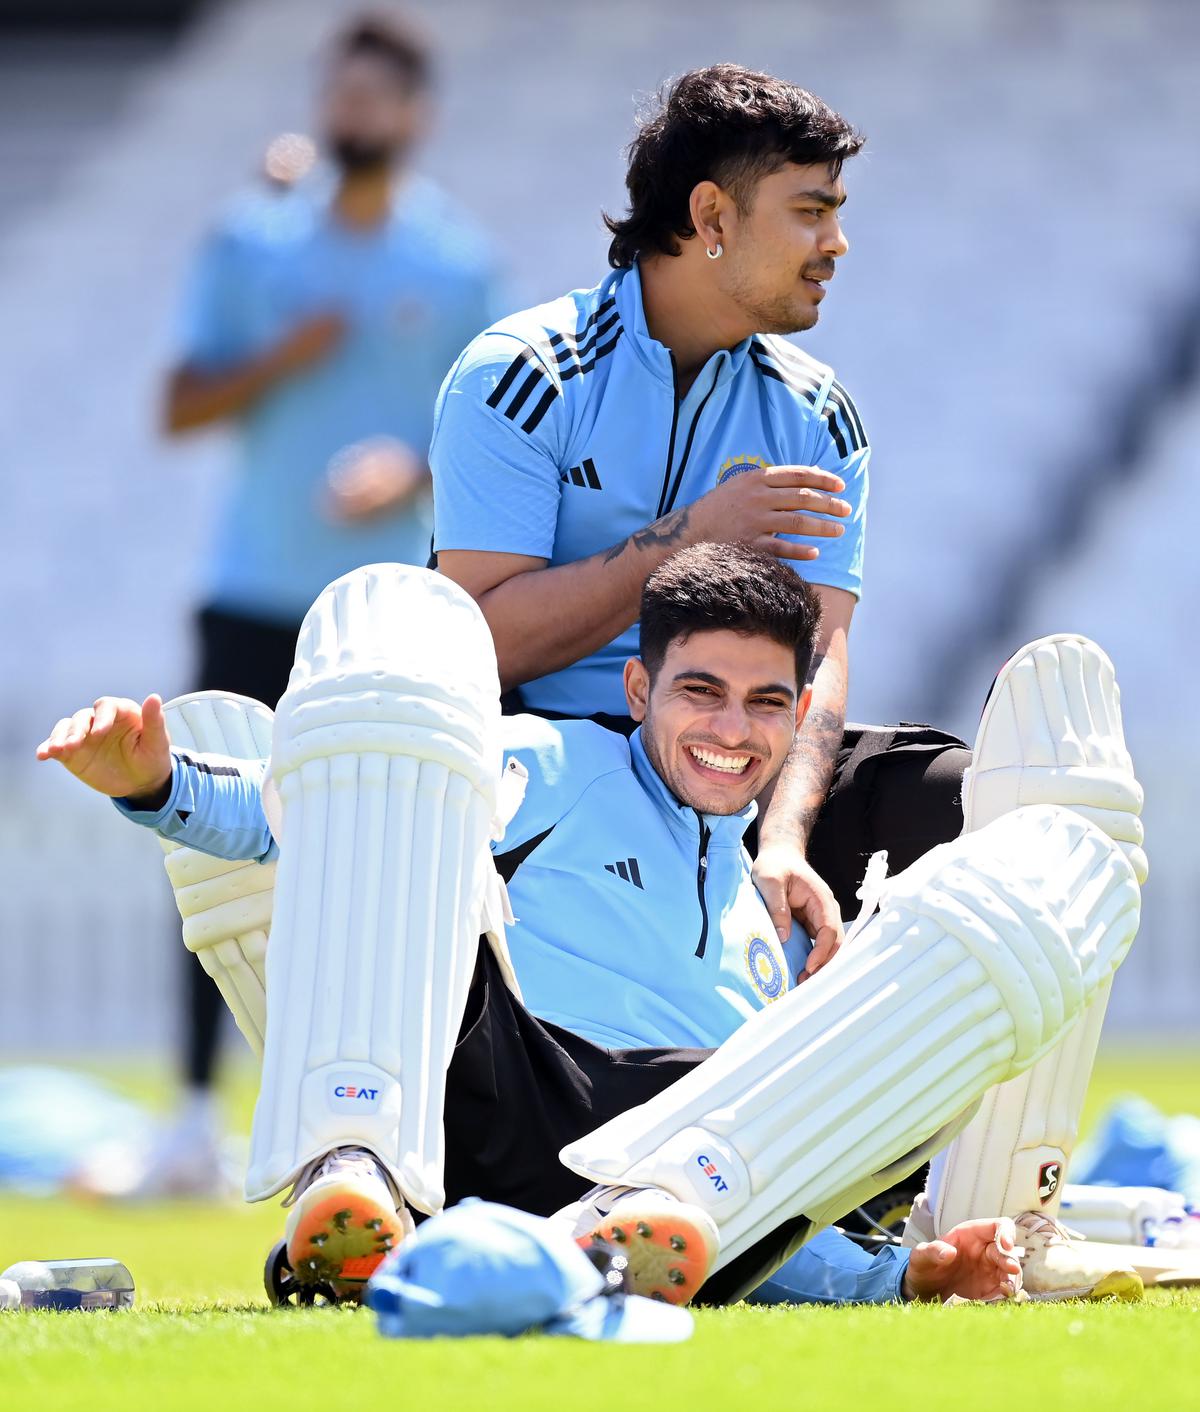 Smiling assassin: Given the way Shubman Gill has been toying with attacks, Australia will have a special eye on him. 